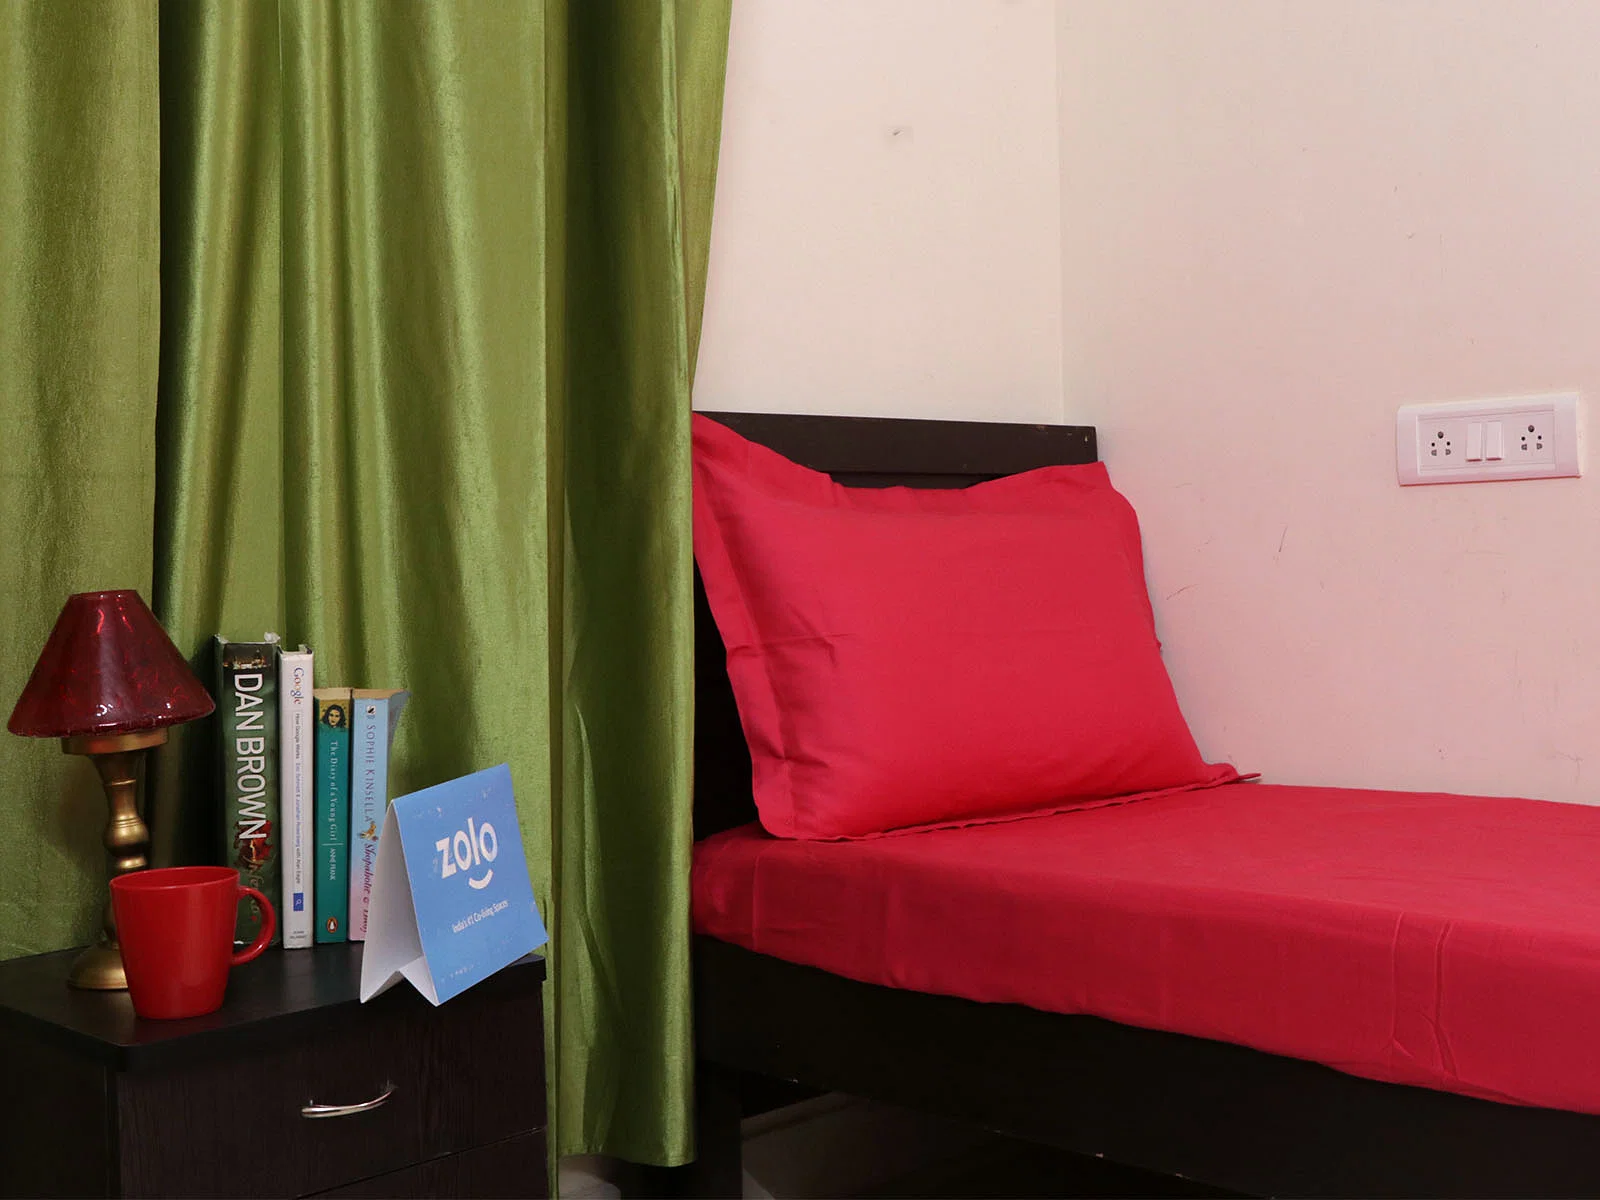 best Coliving rooms with high-speed Wi-Fi, shared kitchens, and laundry facilities-Zolo Templar